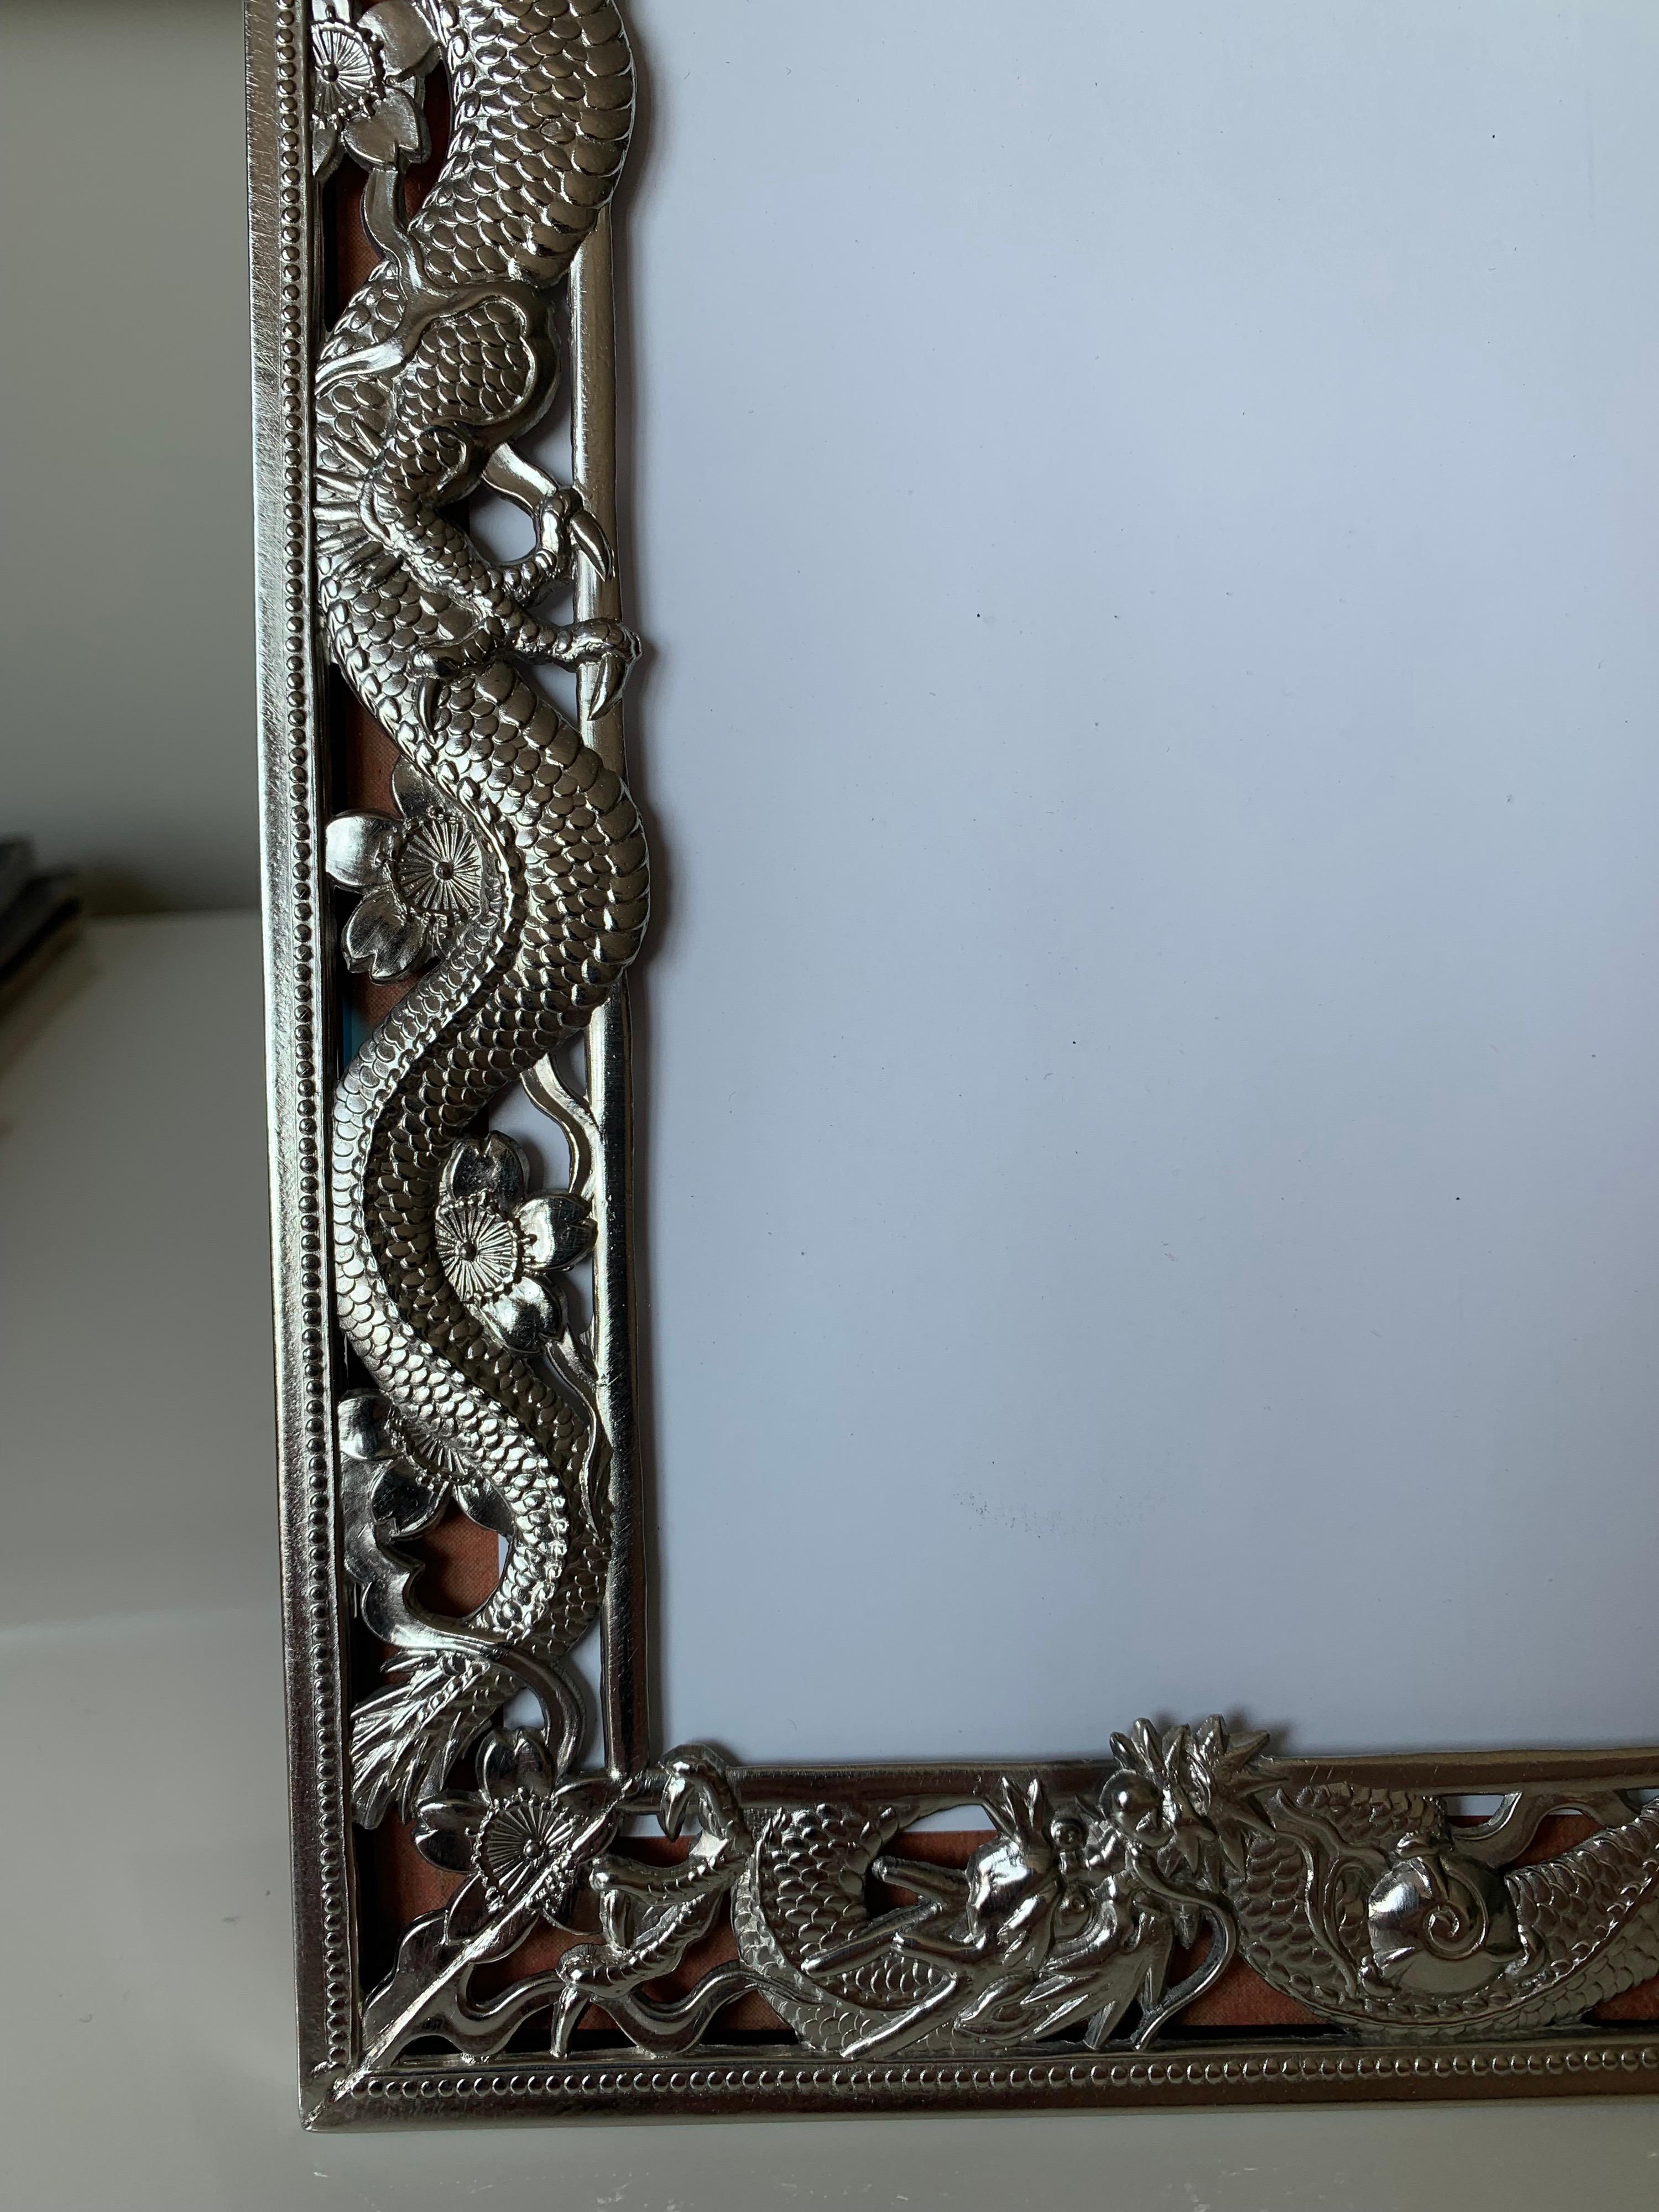 Chinese export dragon motif silver plate picture frame. Newly replaced. New low glare clear glass. Original burgundy leather easel back. Opening is 9.5” tall x 7.5” wide.